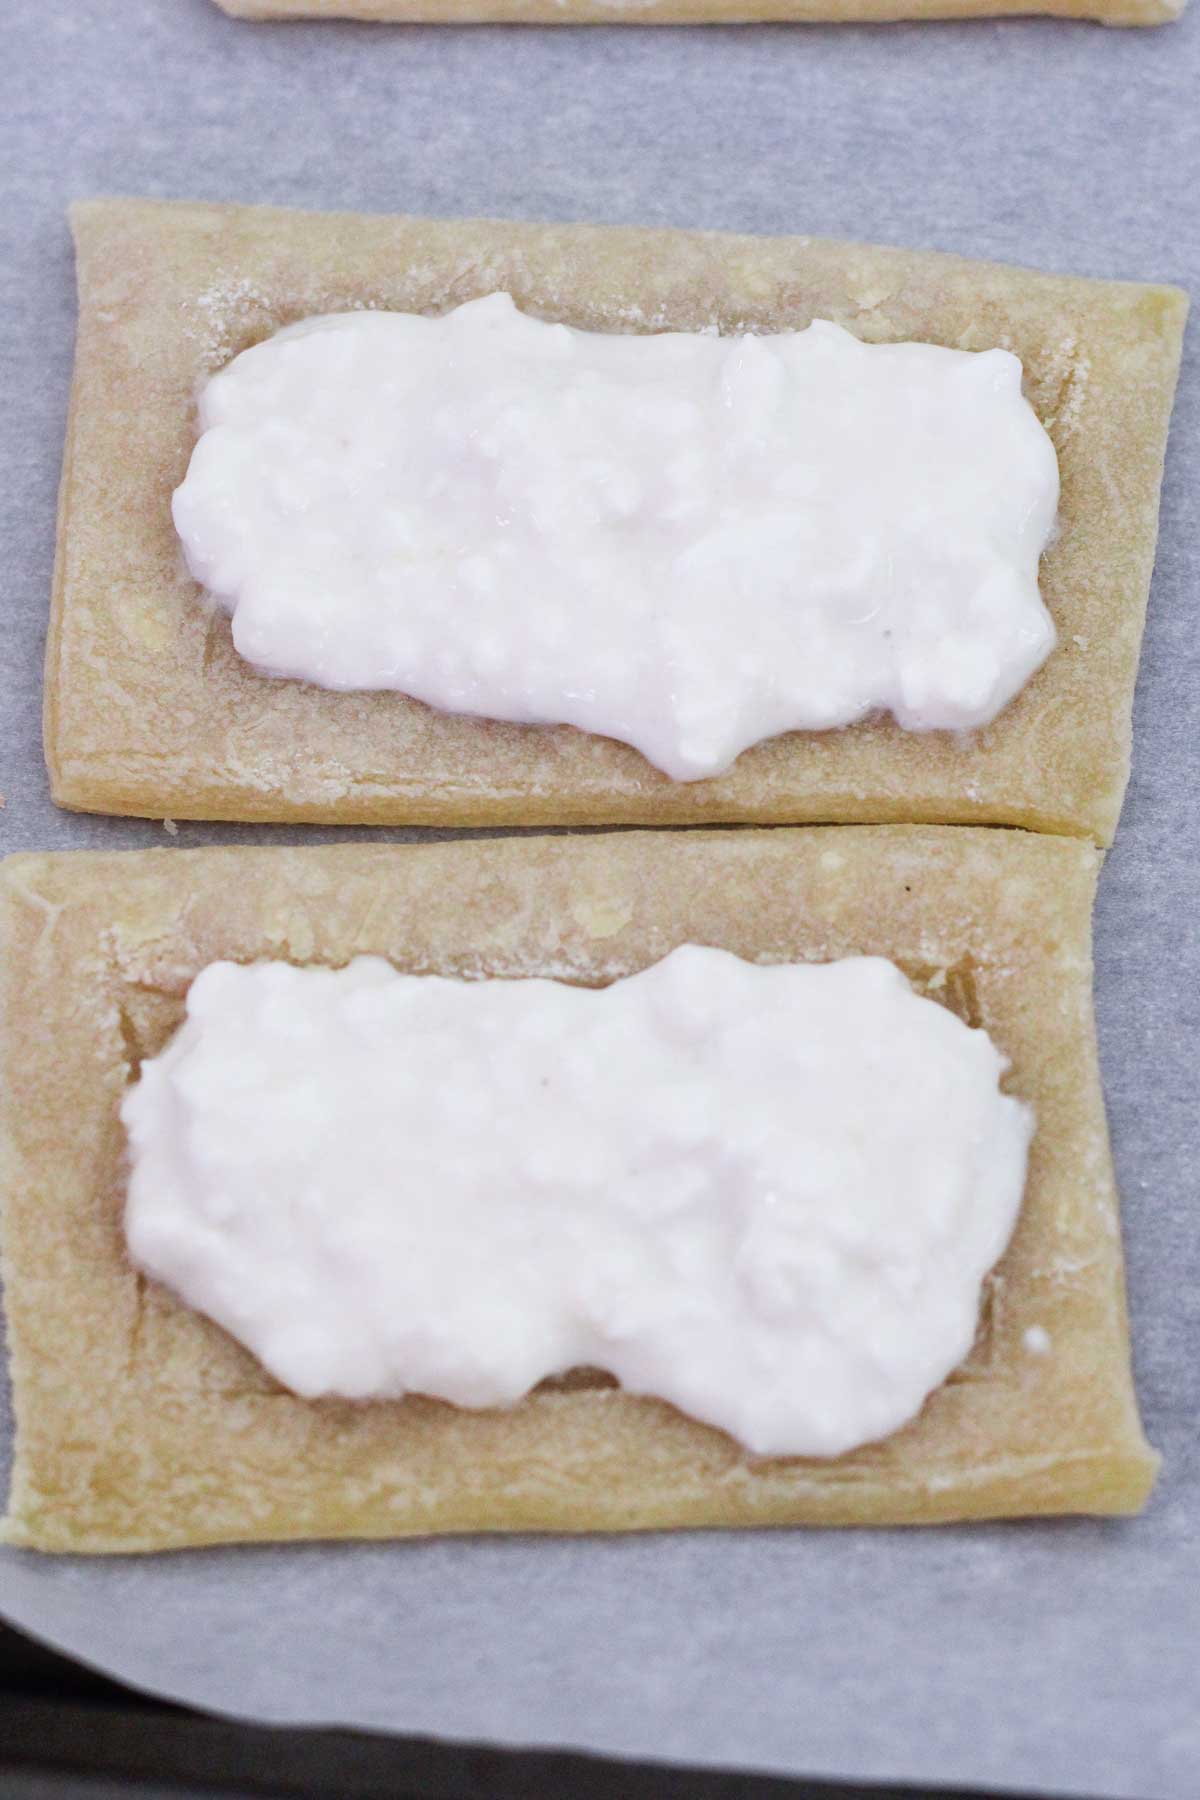 Adding whipped cottage cheese and honey over the puff pastry rectangles.